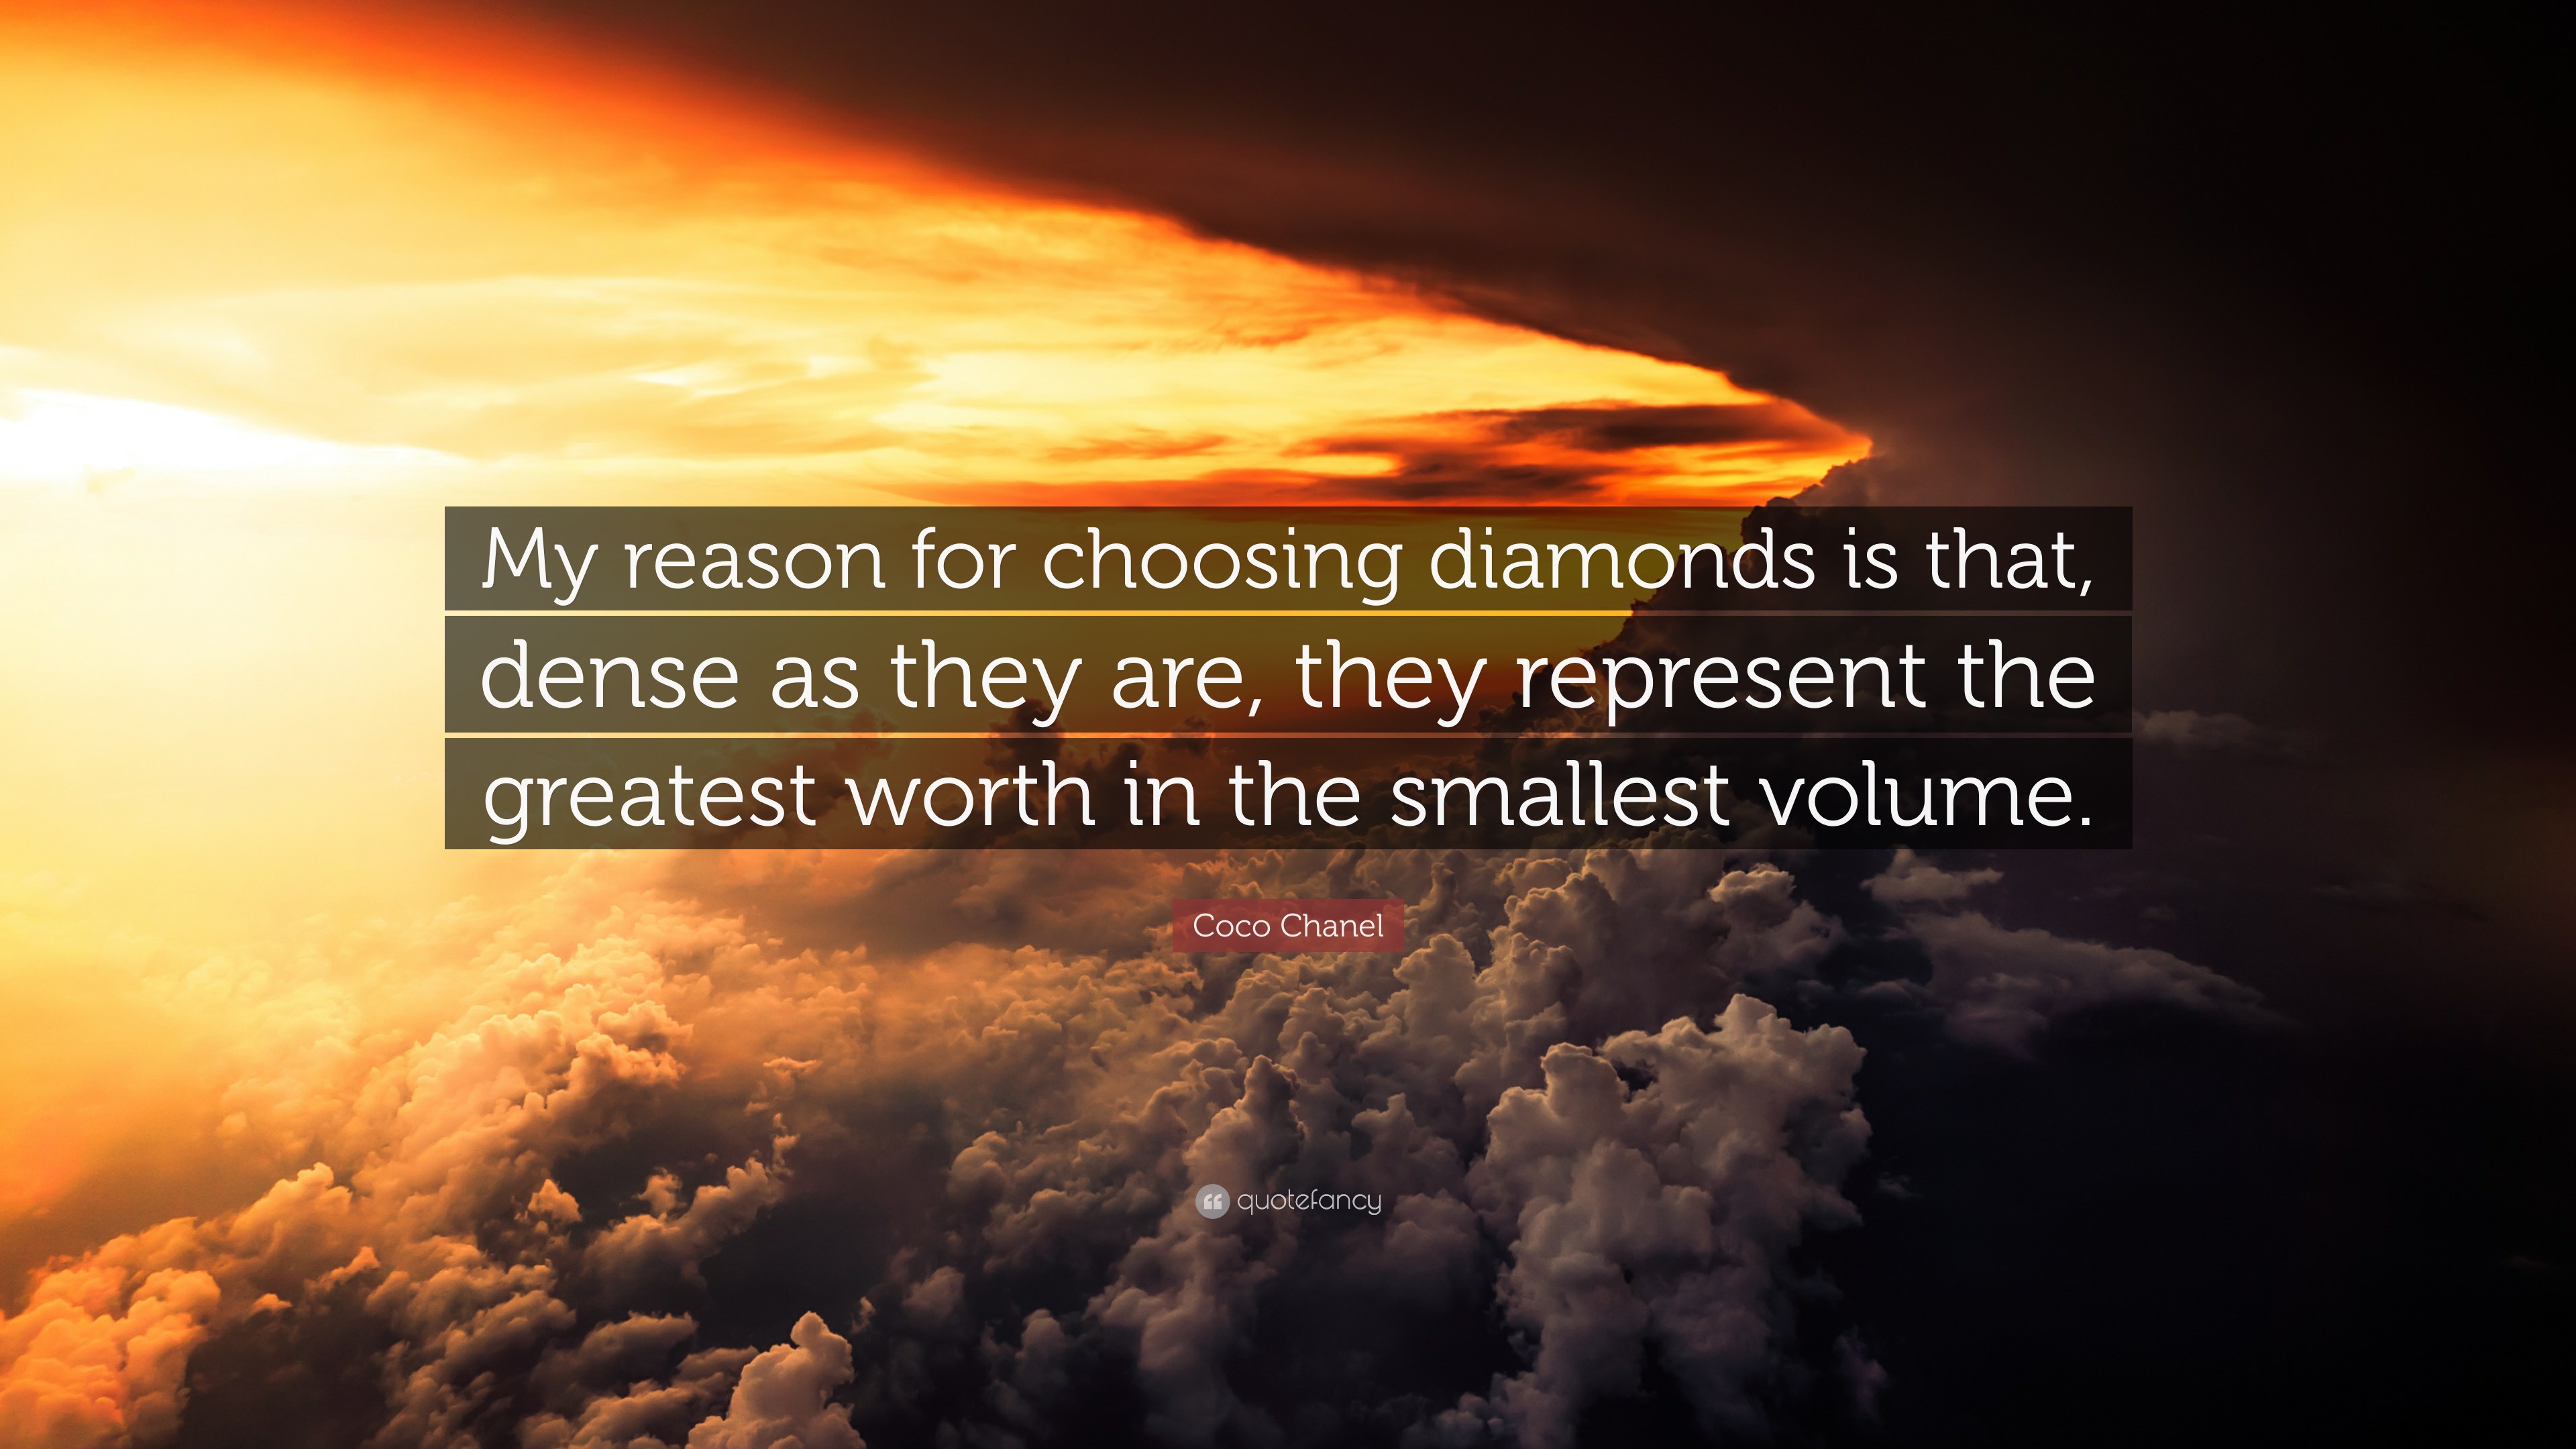 Coco Chanel Quote: “My reason for choosing diamonds is that, dense as they  are, they represent